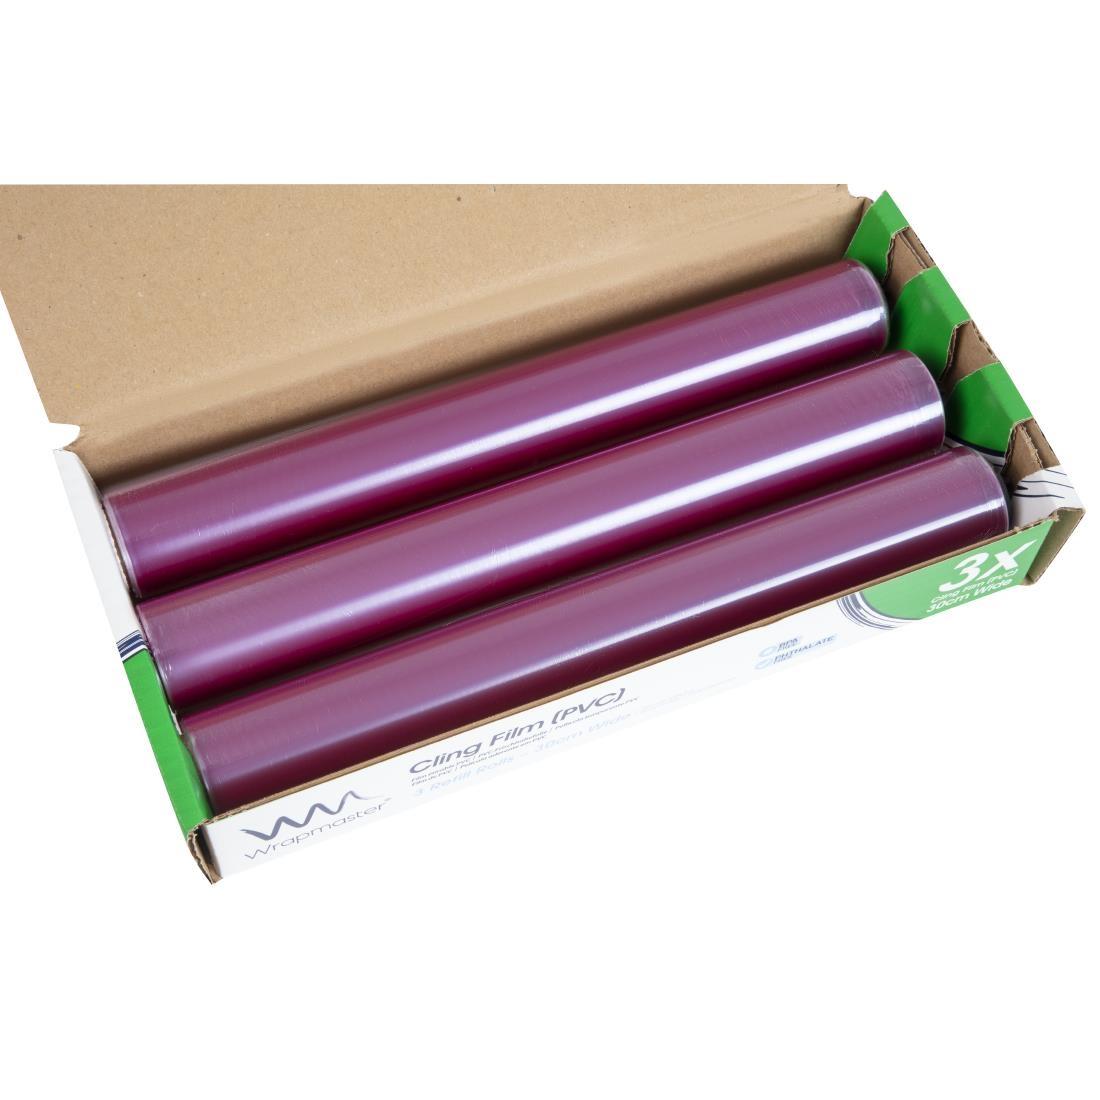 Wrapmaster Cling Film 300mm x 100m (Pack of 3) - CB624  - 3